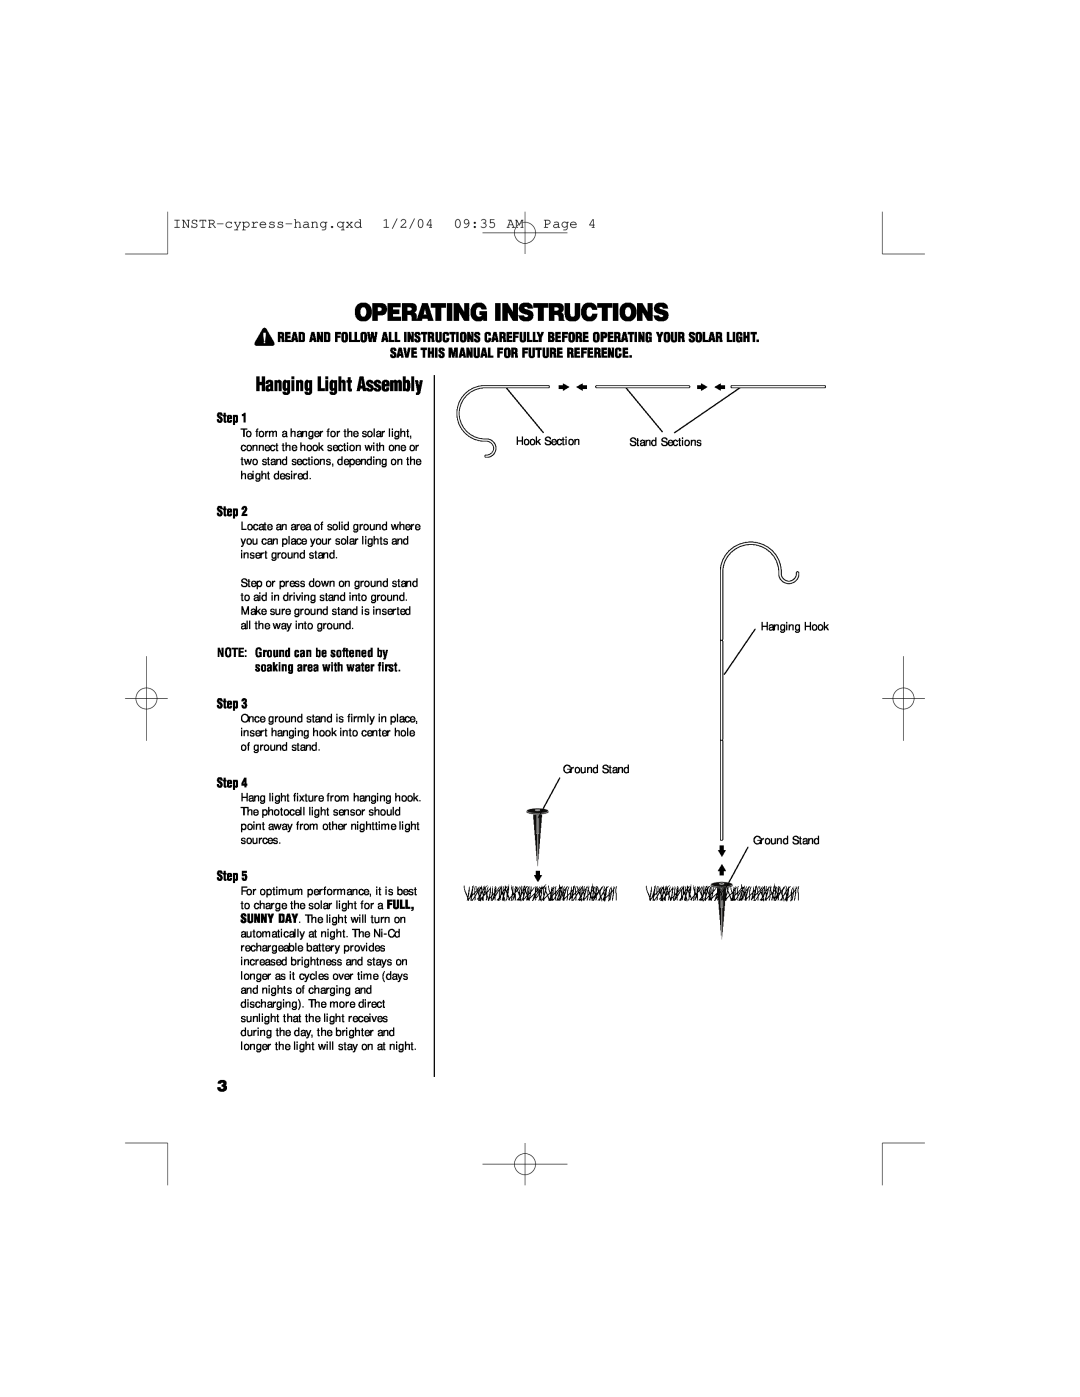 Brinkmann 822-1526-2 Operating Instructions, Hanging Light Assembly, Step, INSTR-cypress-hang.qxd1/2/04 09 35 AM Page 